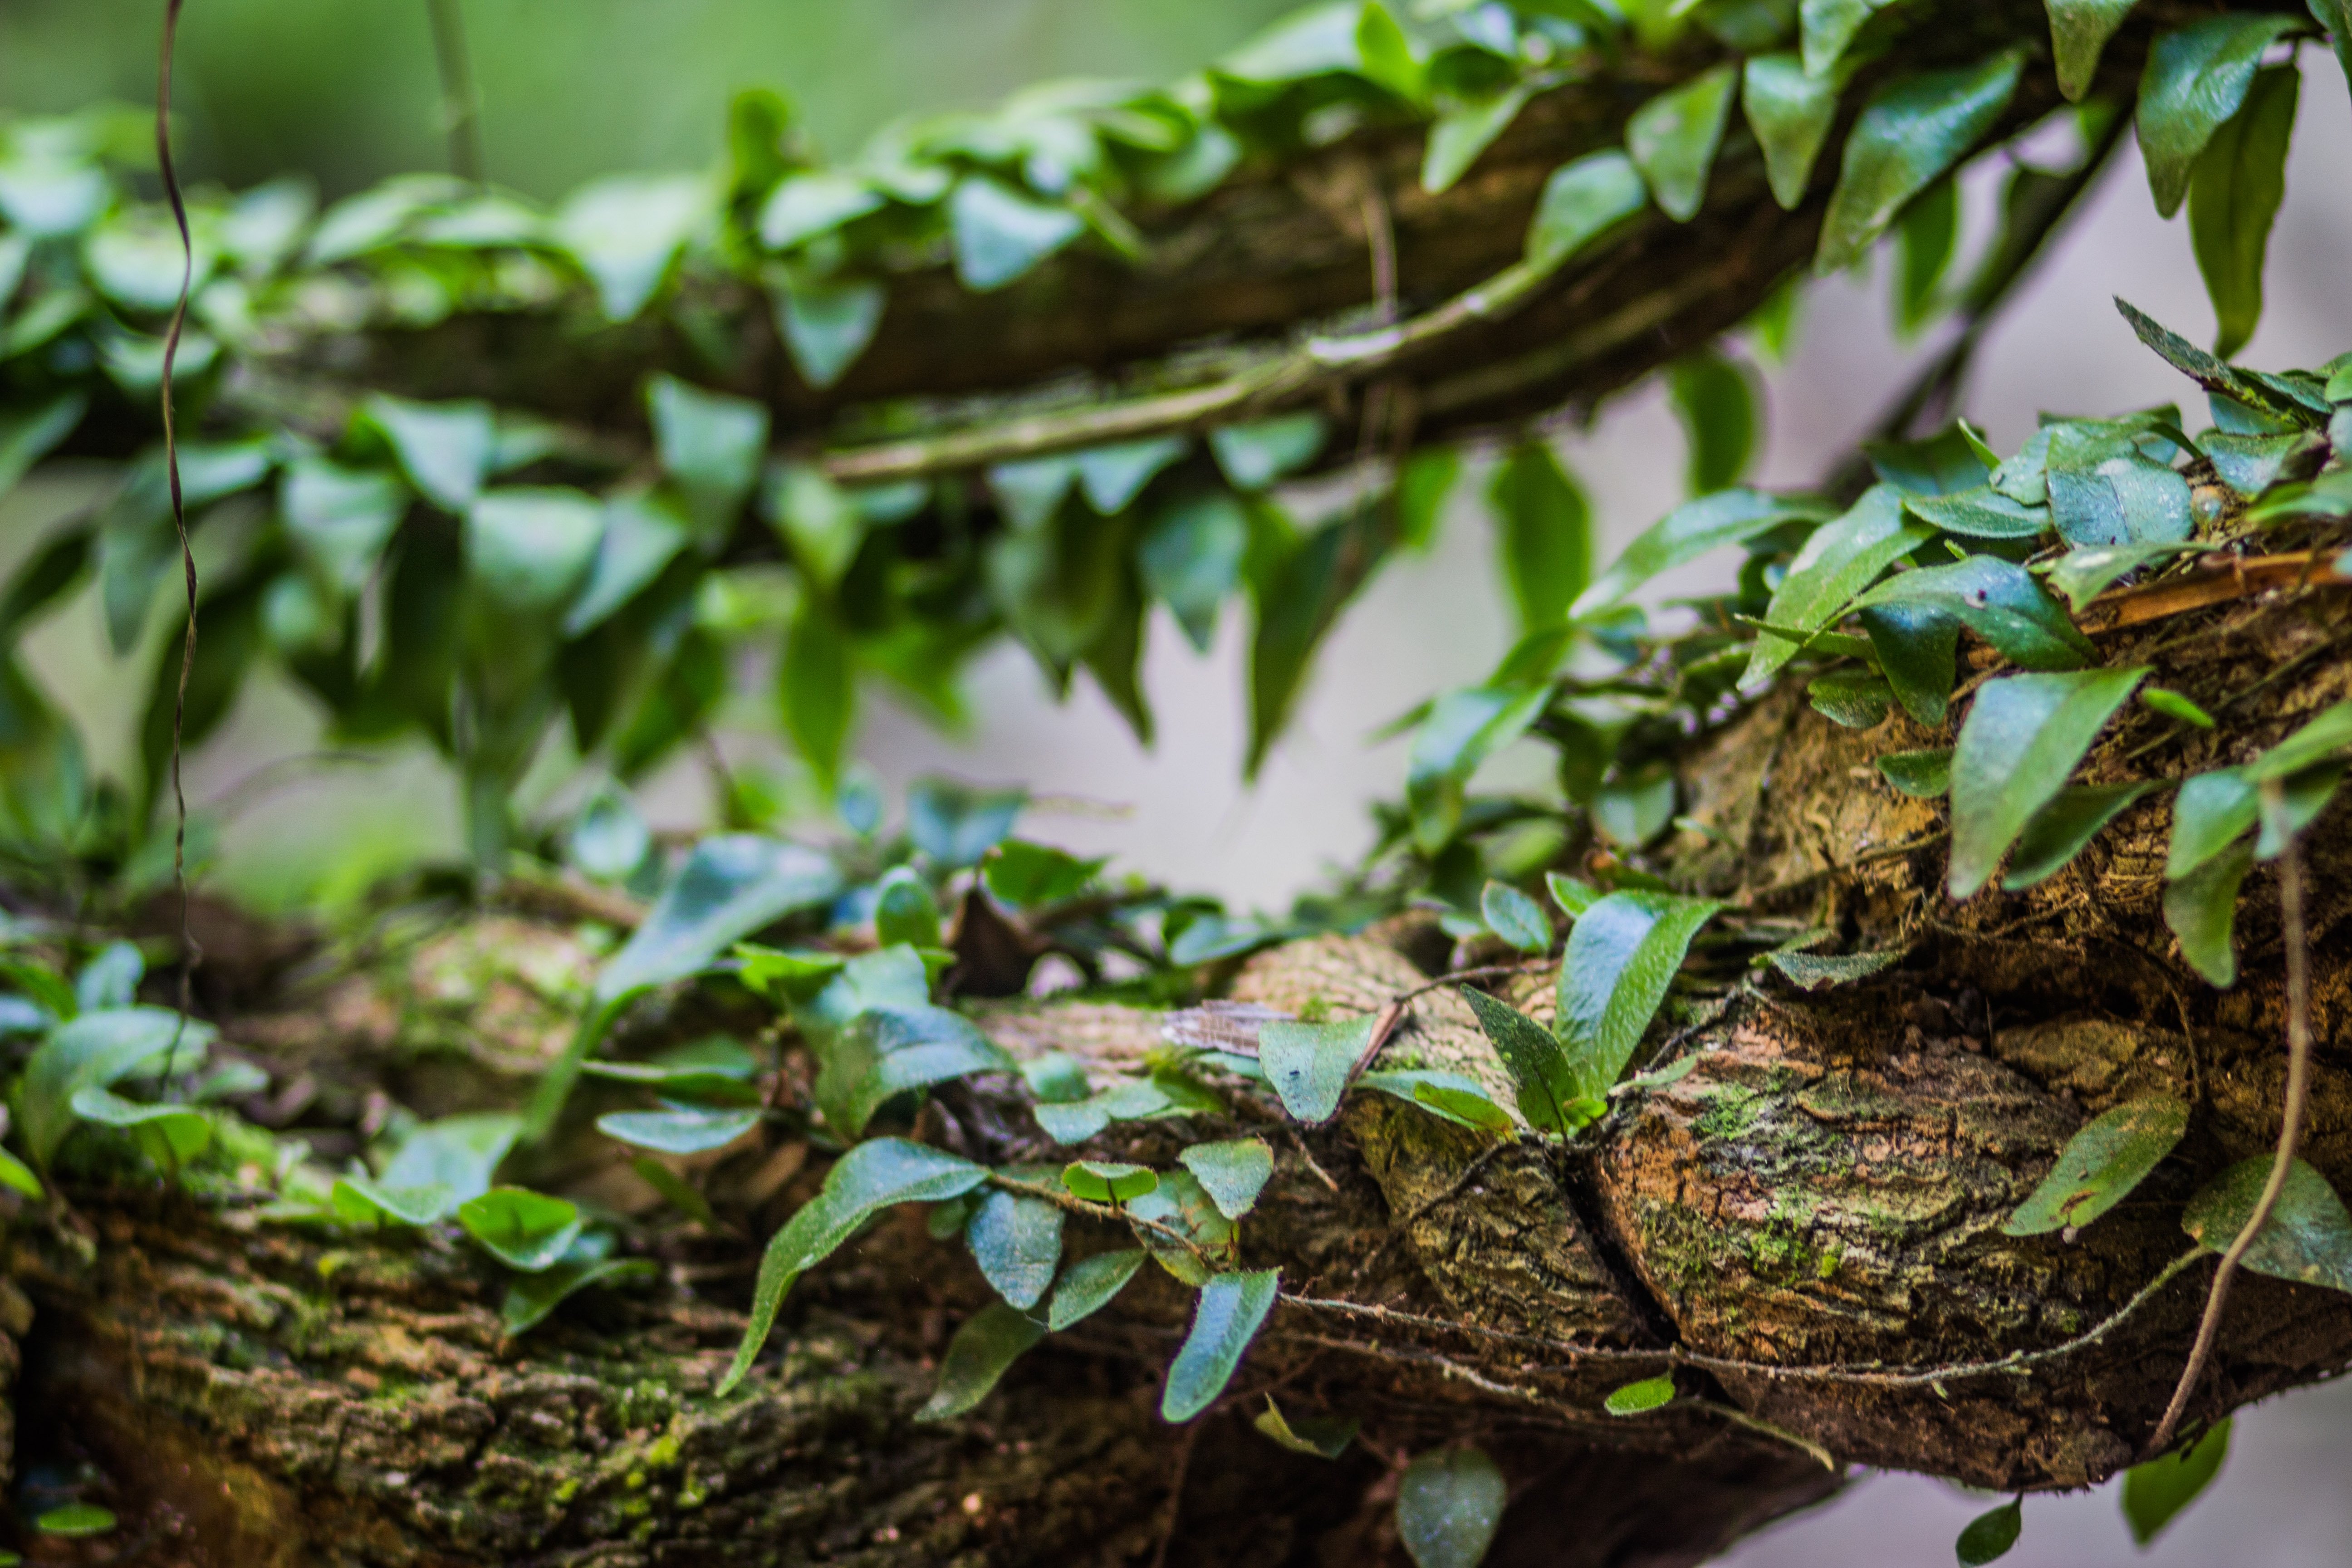 The Ayahuasca Plant: Usage, Effects, and Research